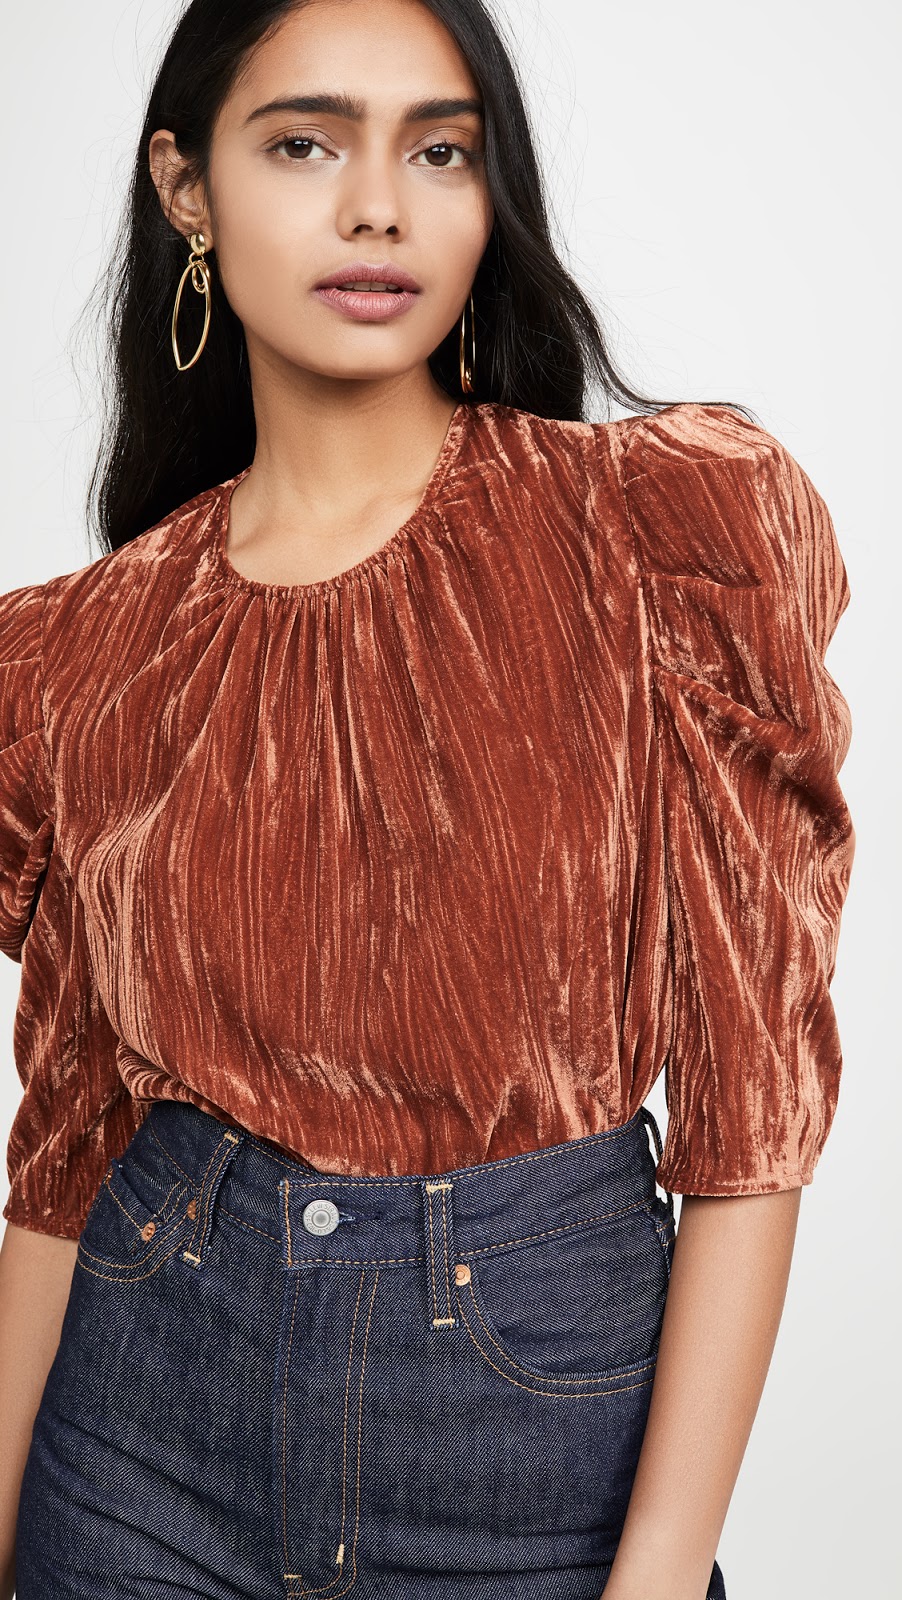 This Under-$100 Top Is Perfect for a Holiday Party